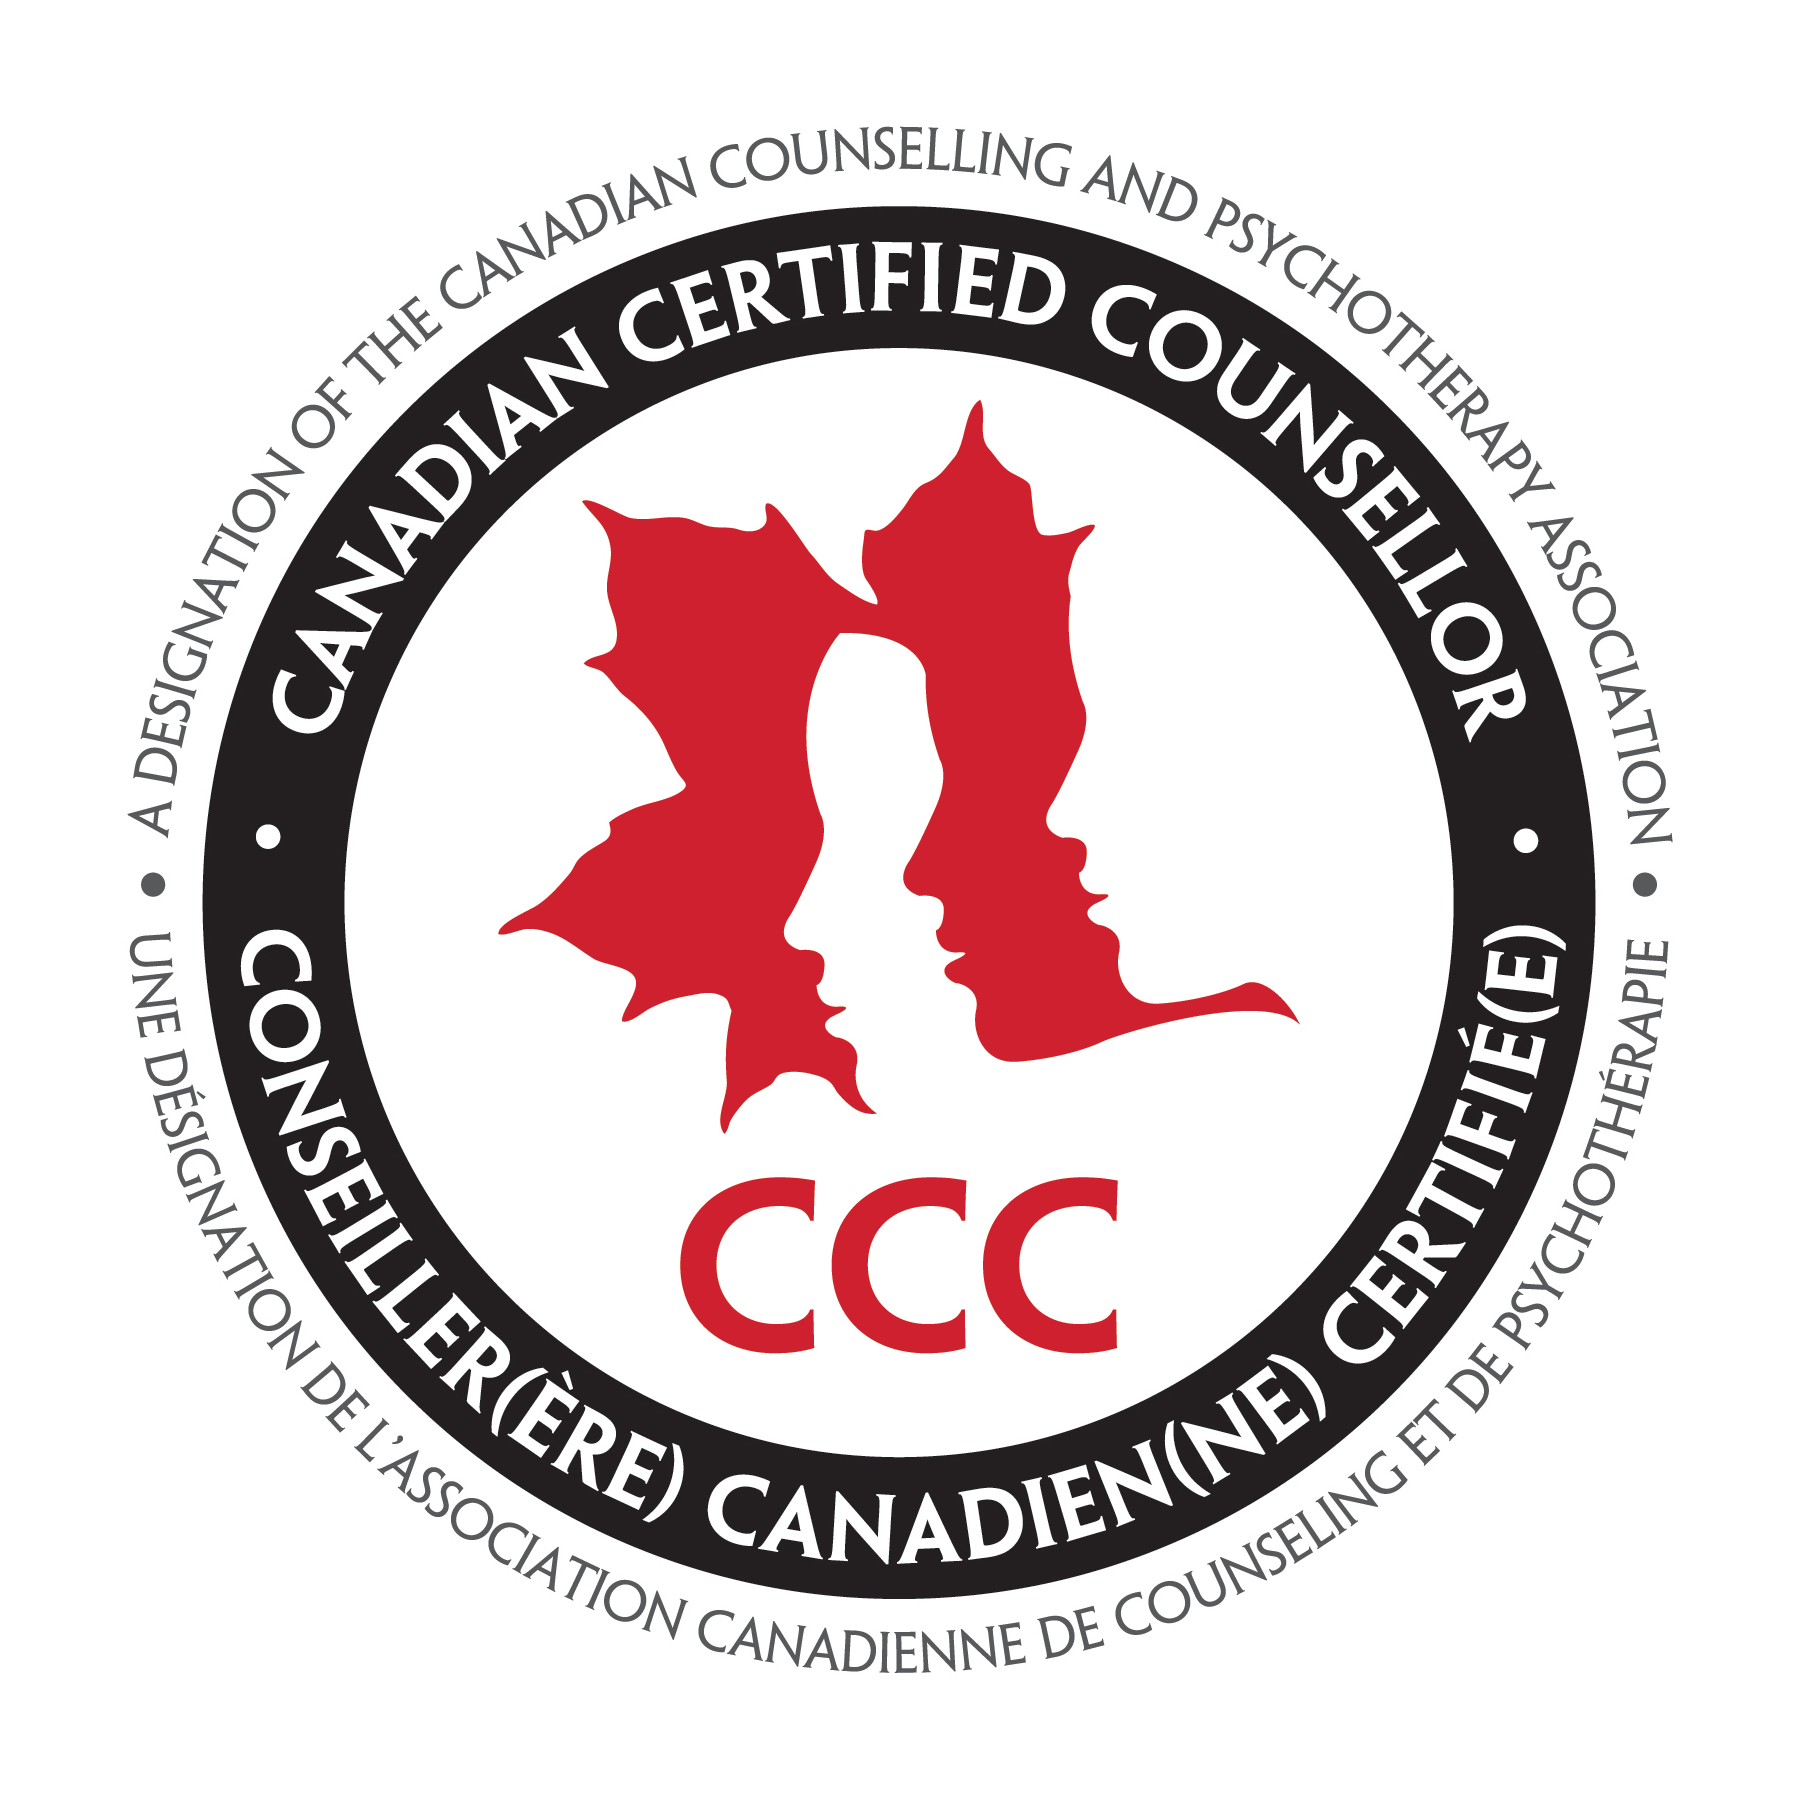 Canadian Certified Counsellor logo